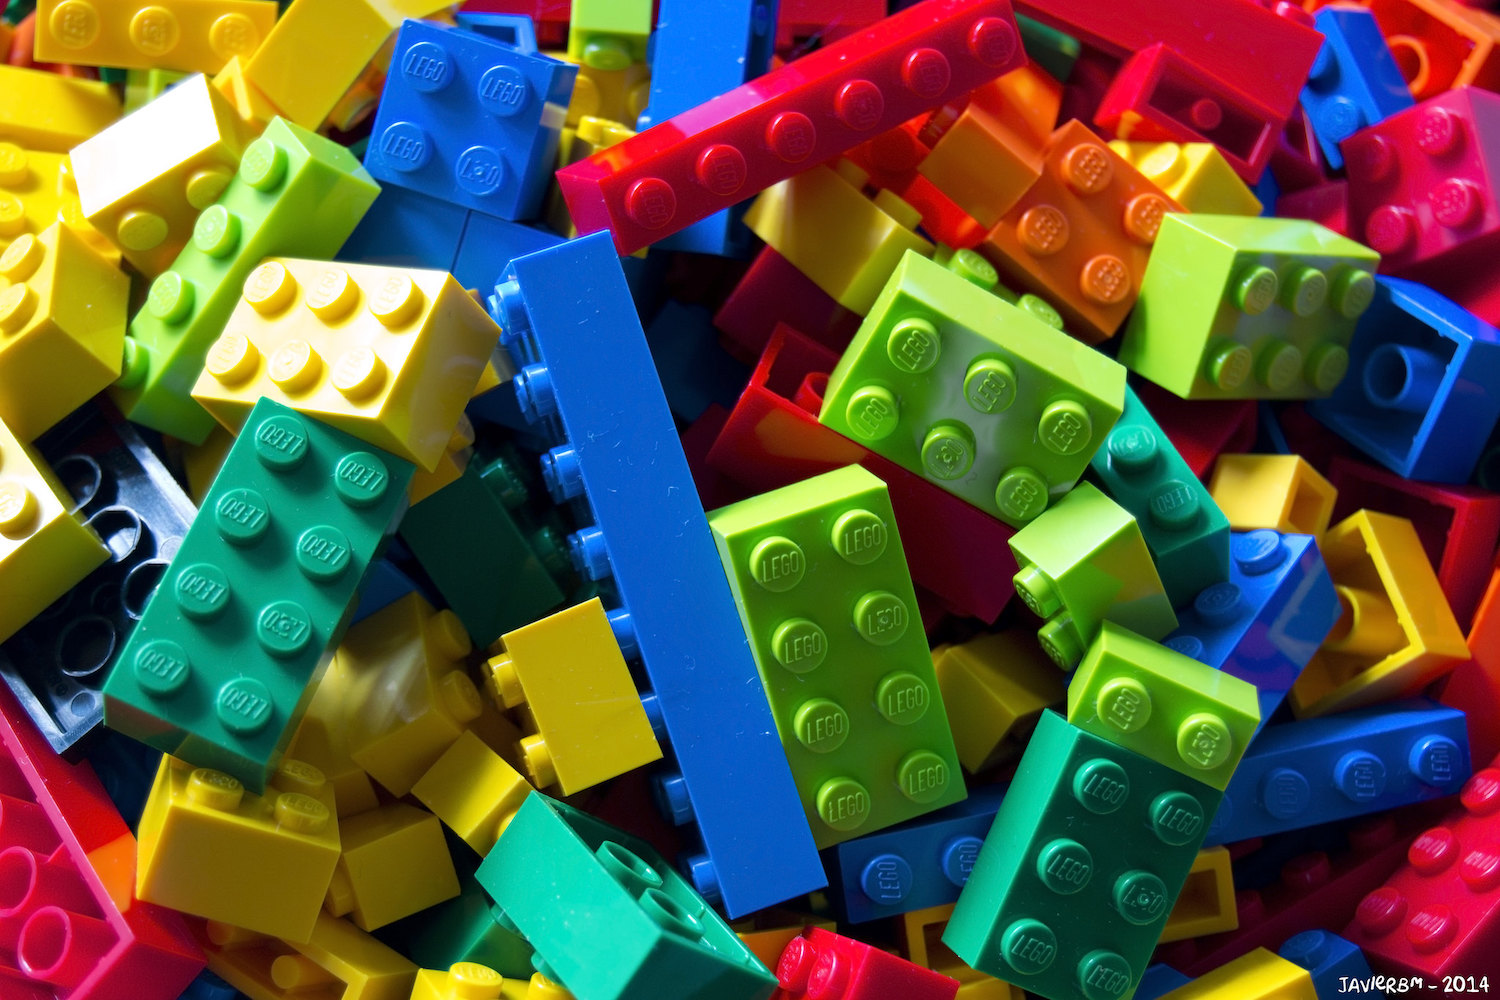 Scientists are trying to structure cell-cultured meat with Lego pieces. Credit: iSchumi / Flickr, March 2019